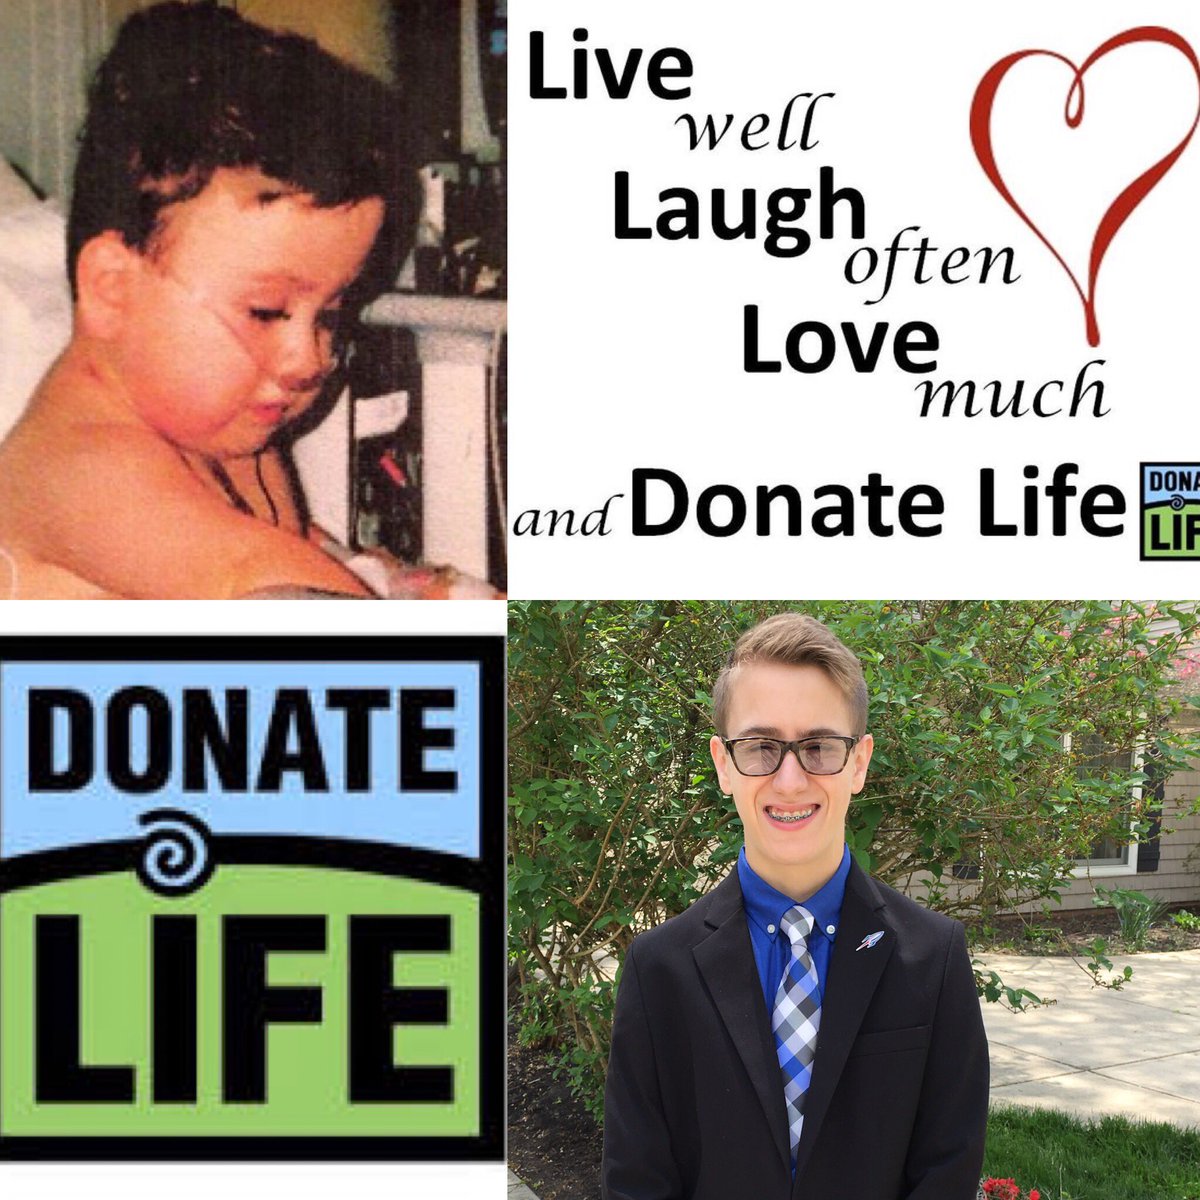 Today is Nathan’s 13 year Kidney Transplant Anniversary! Life is good! Be a donor! #livingkidneydonor